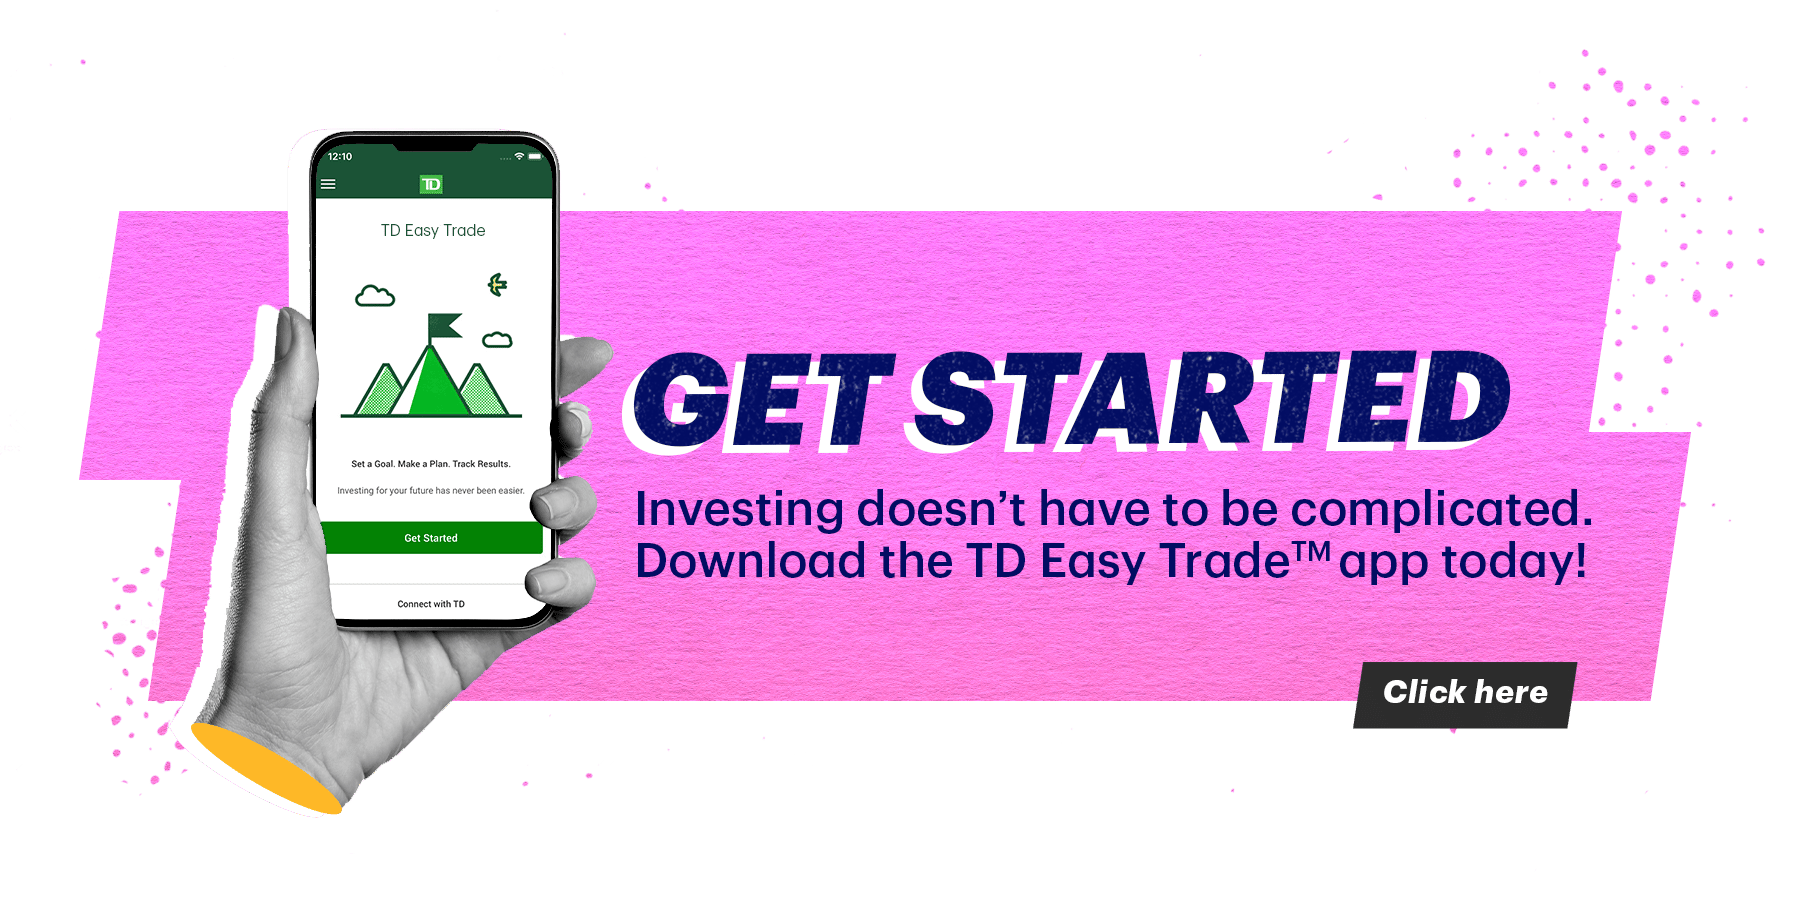 Get Started. Investing doesn't have to be complicated. Download the TD EasyTrade app today!